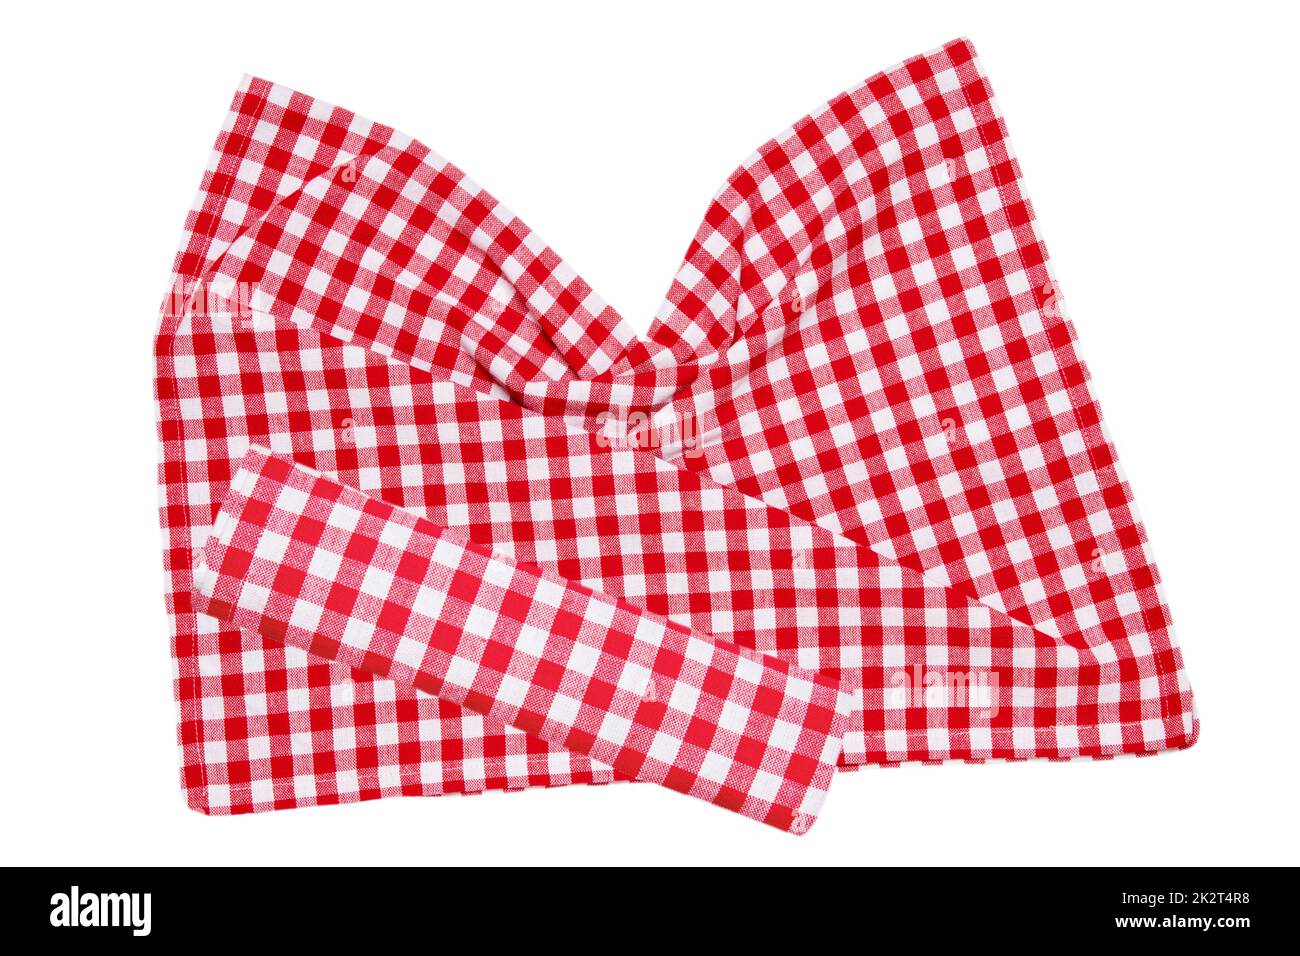 Red picnic blanket. Closeup of a red checkered napkin or tablecloth texture isolated on a white background. Beautiful backdrop for your product placement or montage. Stock Photo